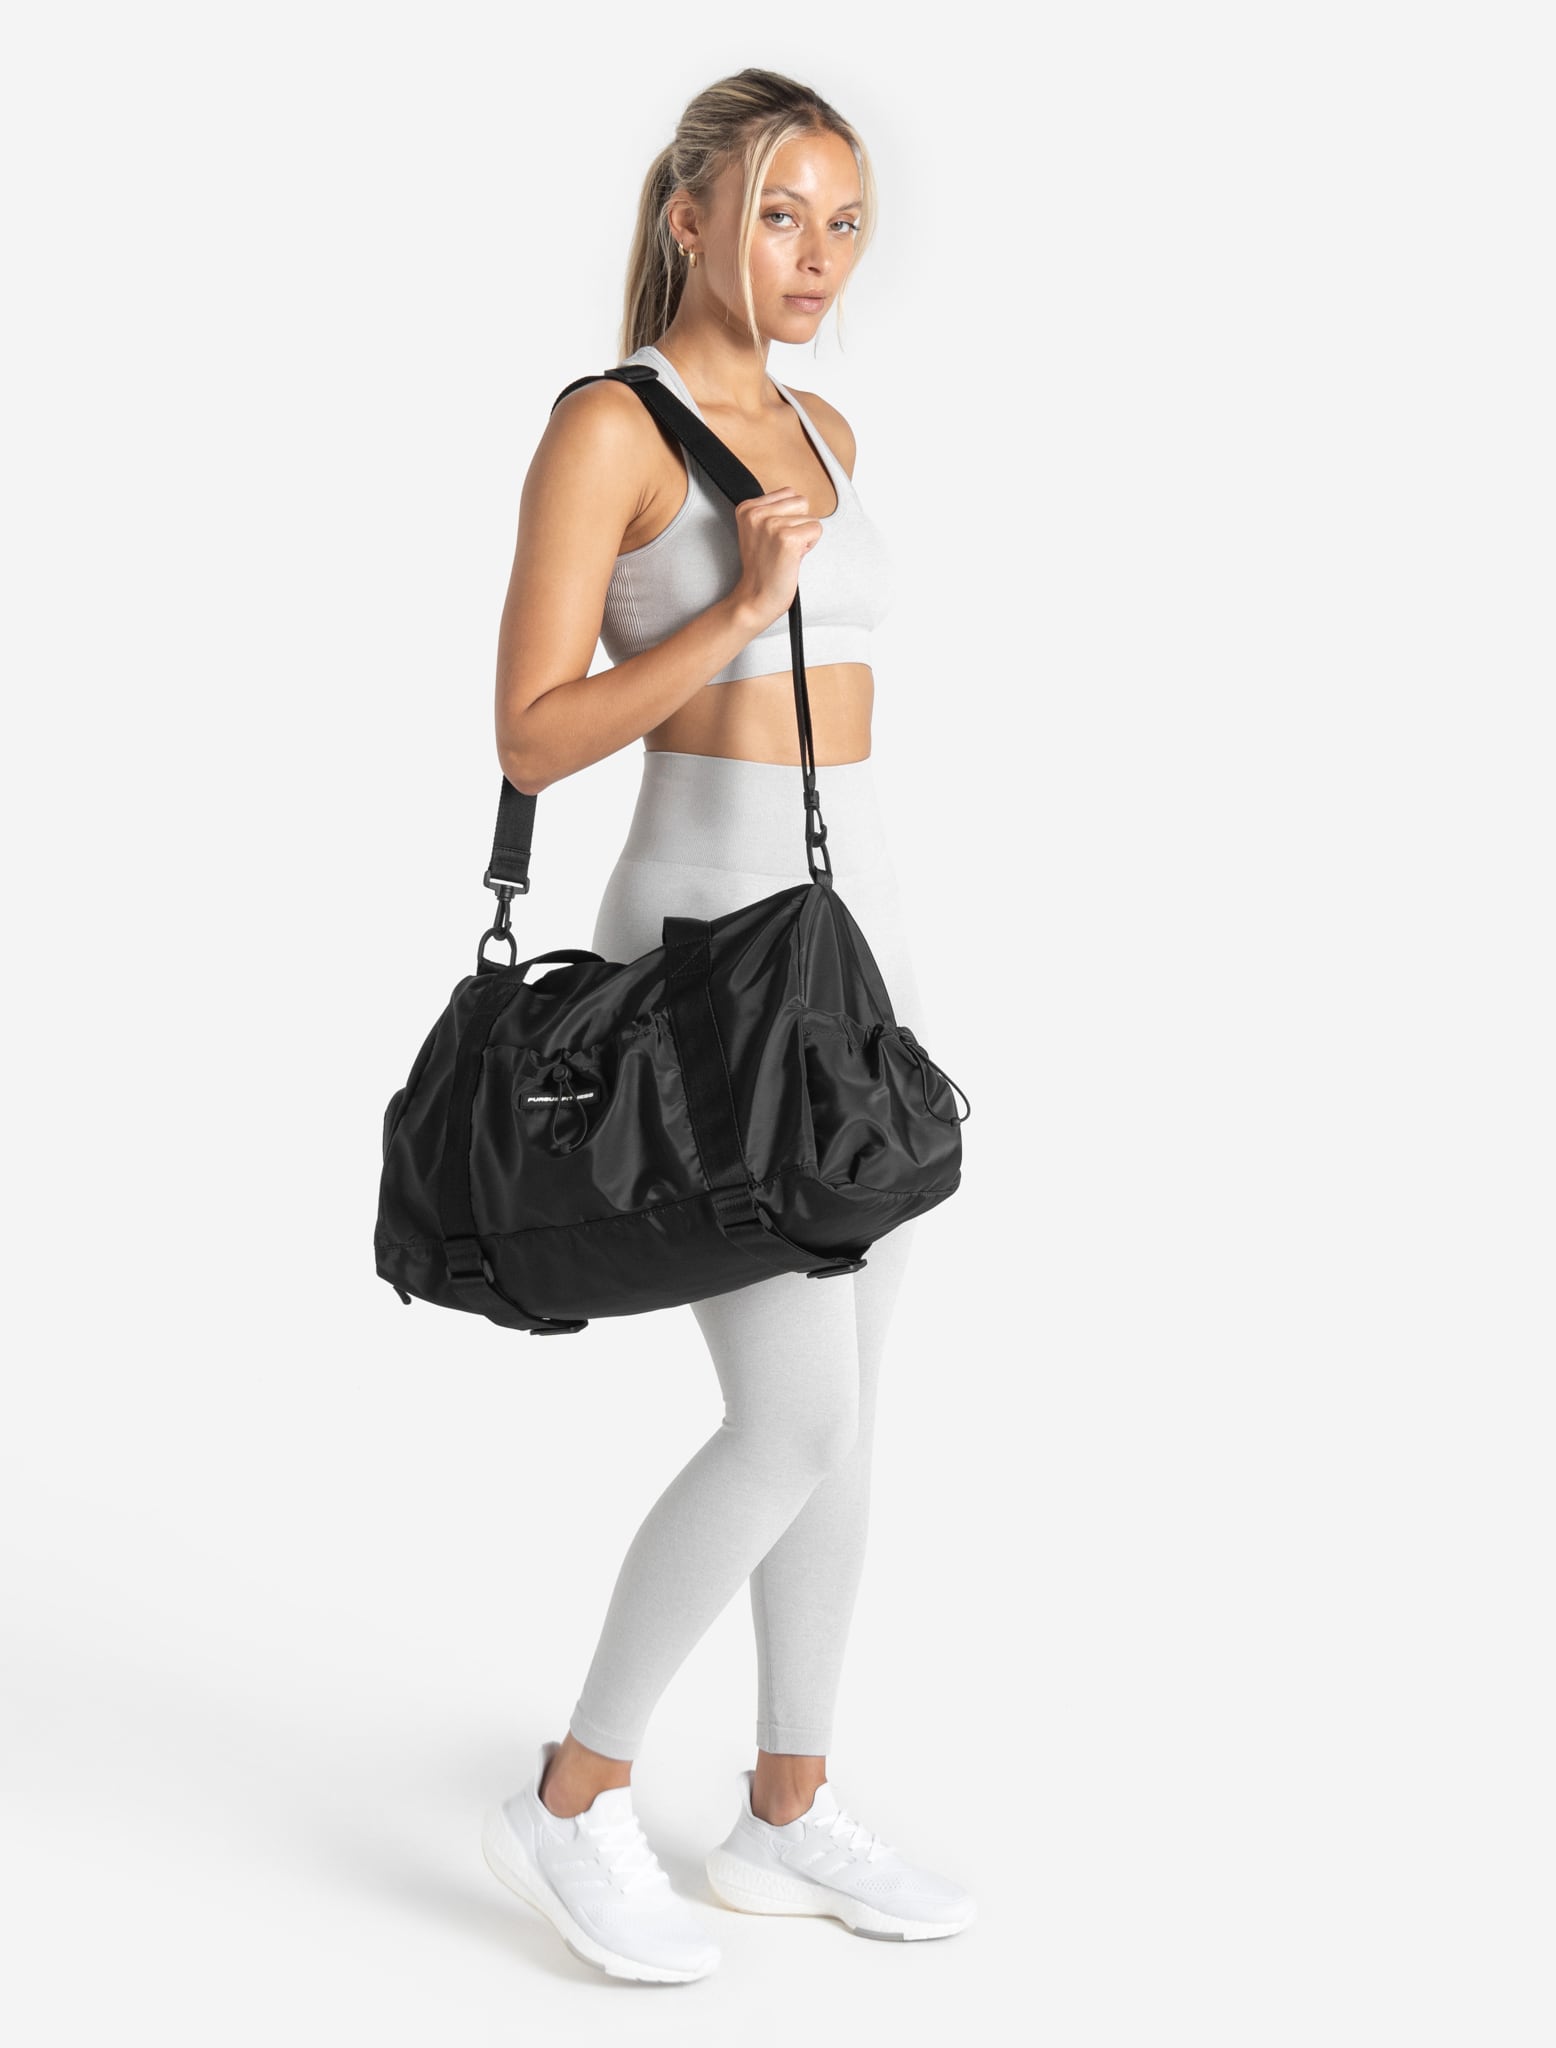 The Holdall - Black Pursue Fitness 2